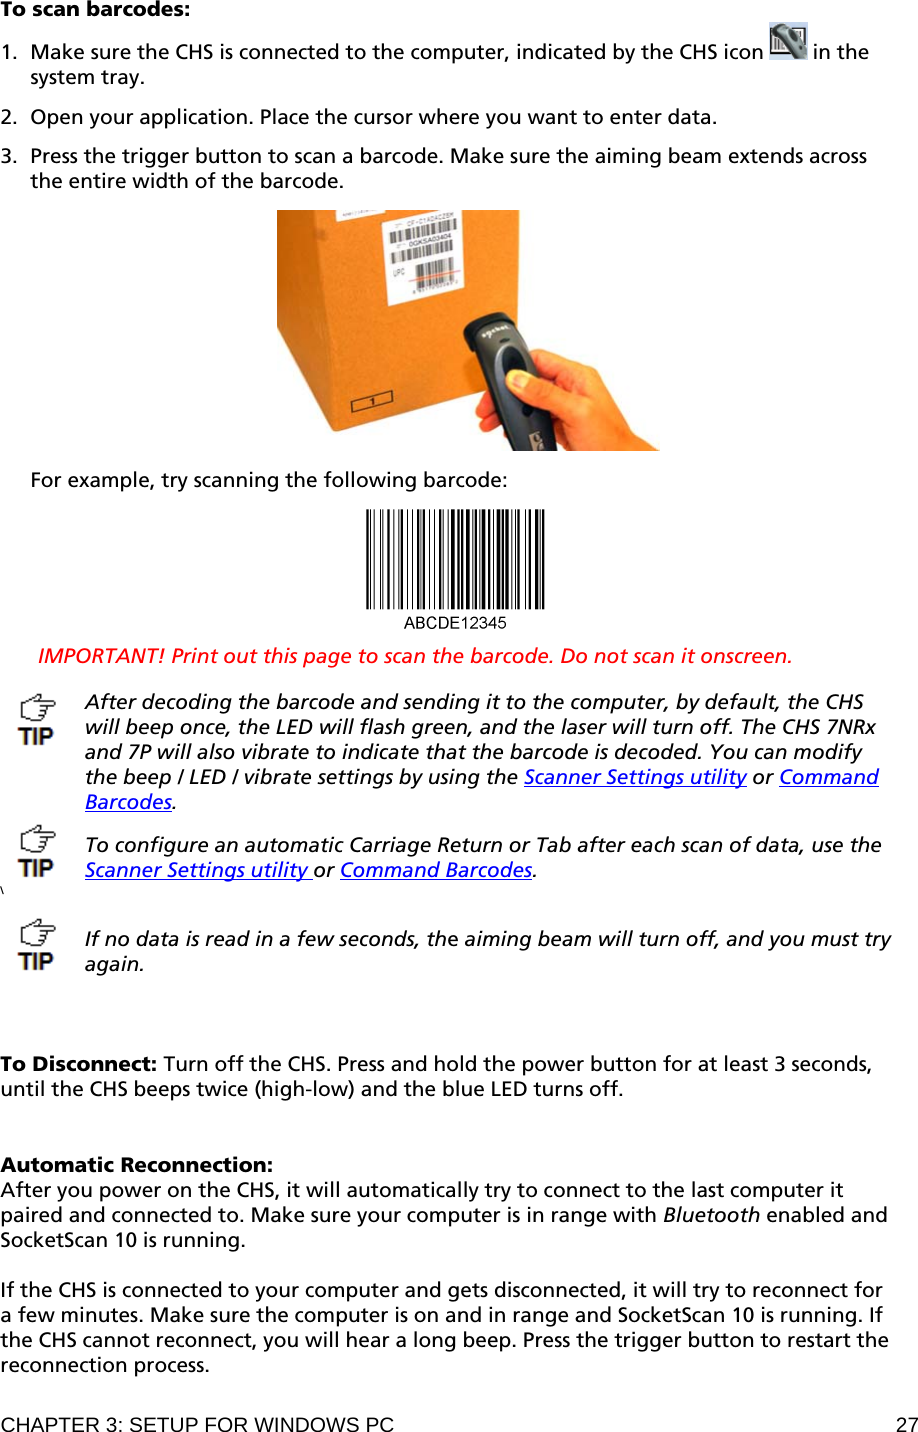 CHAPTER 3: SETUP FOR WINDOWS PC  27 To scan barcodes: 1. Make sure the CHS is connected to the computer, indicated by the CHS icon   in the system tray.  2. Open your application. Place the cursor where you want to enter data.  3. Press the trigger button to scan a barcode. Make sure the aiming beam extends across the entire width of the barcode.    For example, try scanning the following barcode:    IMPORTANT! Print out this page to scan the barcode. Do not scan it onscreen.  After decoding the barcode and sending it to the computer, by default, the CHS will beep once, the LED will flash green, and the laser will turn off. The CHS 7NRx and 7P will also vibrate to indicate that the barcode is decoded. You can modify the beep / LED / vibrate settings by using the Scanner Settings utility or Command Barcodes.  To configure an automatic Carriage Return or Tab after each scan of data, use the Scanner Settings utility or Command Barcodes. \   If no data is read in a few seconds, the aiming beam will turn off, and you must try again.    To Disconnect: Turn off the CHS. Press and hold the power button for at least 3 seconds, until the CHS beeps twice (high-low) and the blue LED turns off.   Automatic Reconnection:  After you power on the CHS, it will automatically try to connect to the last computer it paired and connected to. Make sure your computer is in range with Bluetooth enabled and SocketScan 10 is running.  If the CHS is connected to your computer and gets disconnected, it will try to reconnect for a few minutes. Make sure the computer is on and in range and SocketScan 10 is running. If the CHS cannot reconnect, you will hear a long beep. Press the trigger button to restart the reconnection process.  